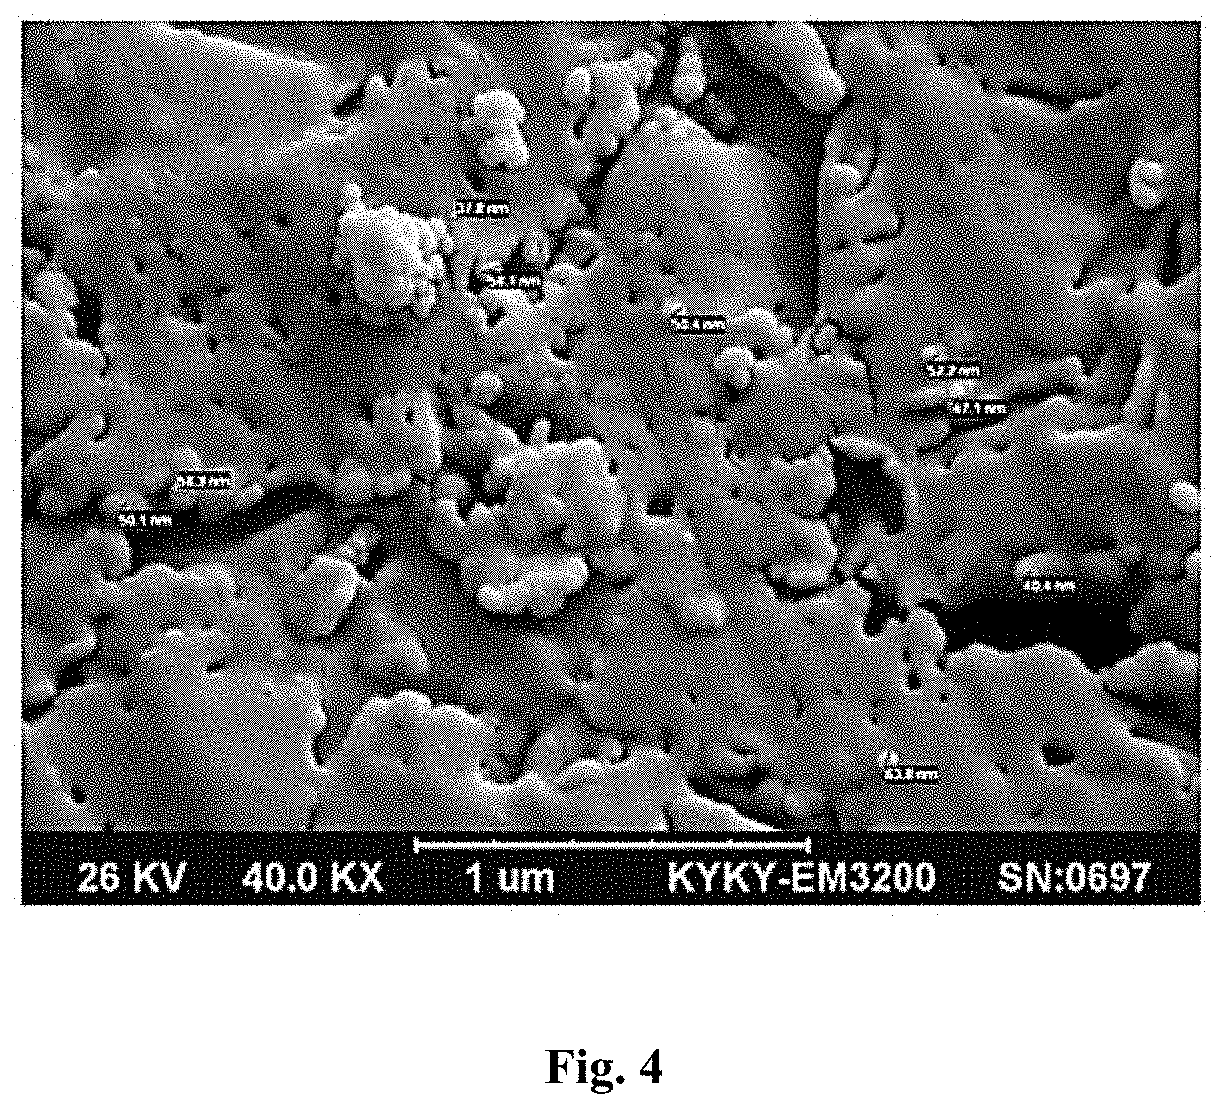 Method for producing antimicrobial nanofilms packaging cover based on titanium nano-dioxide through extrusion for extension of food shelf-life